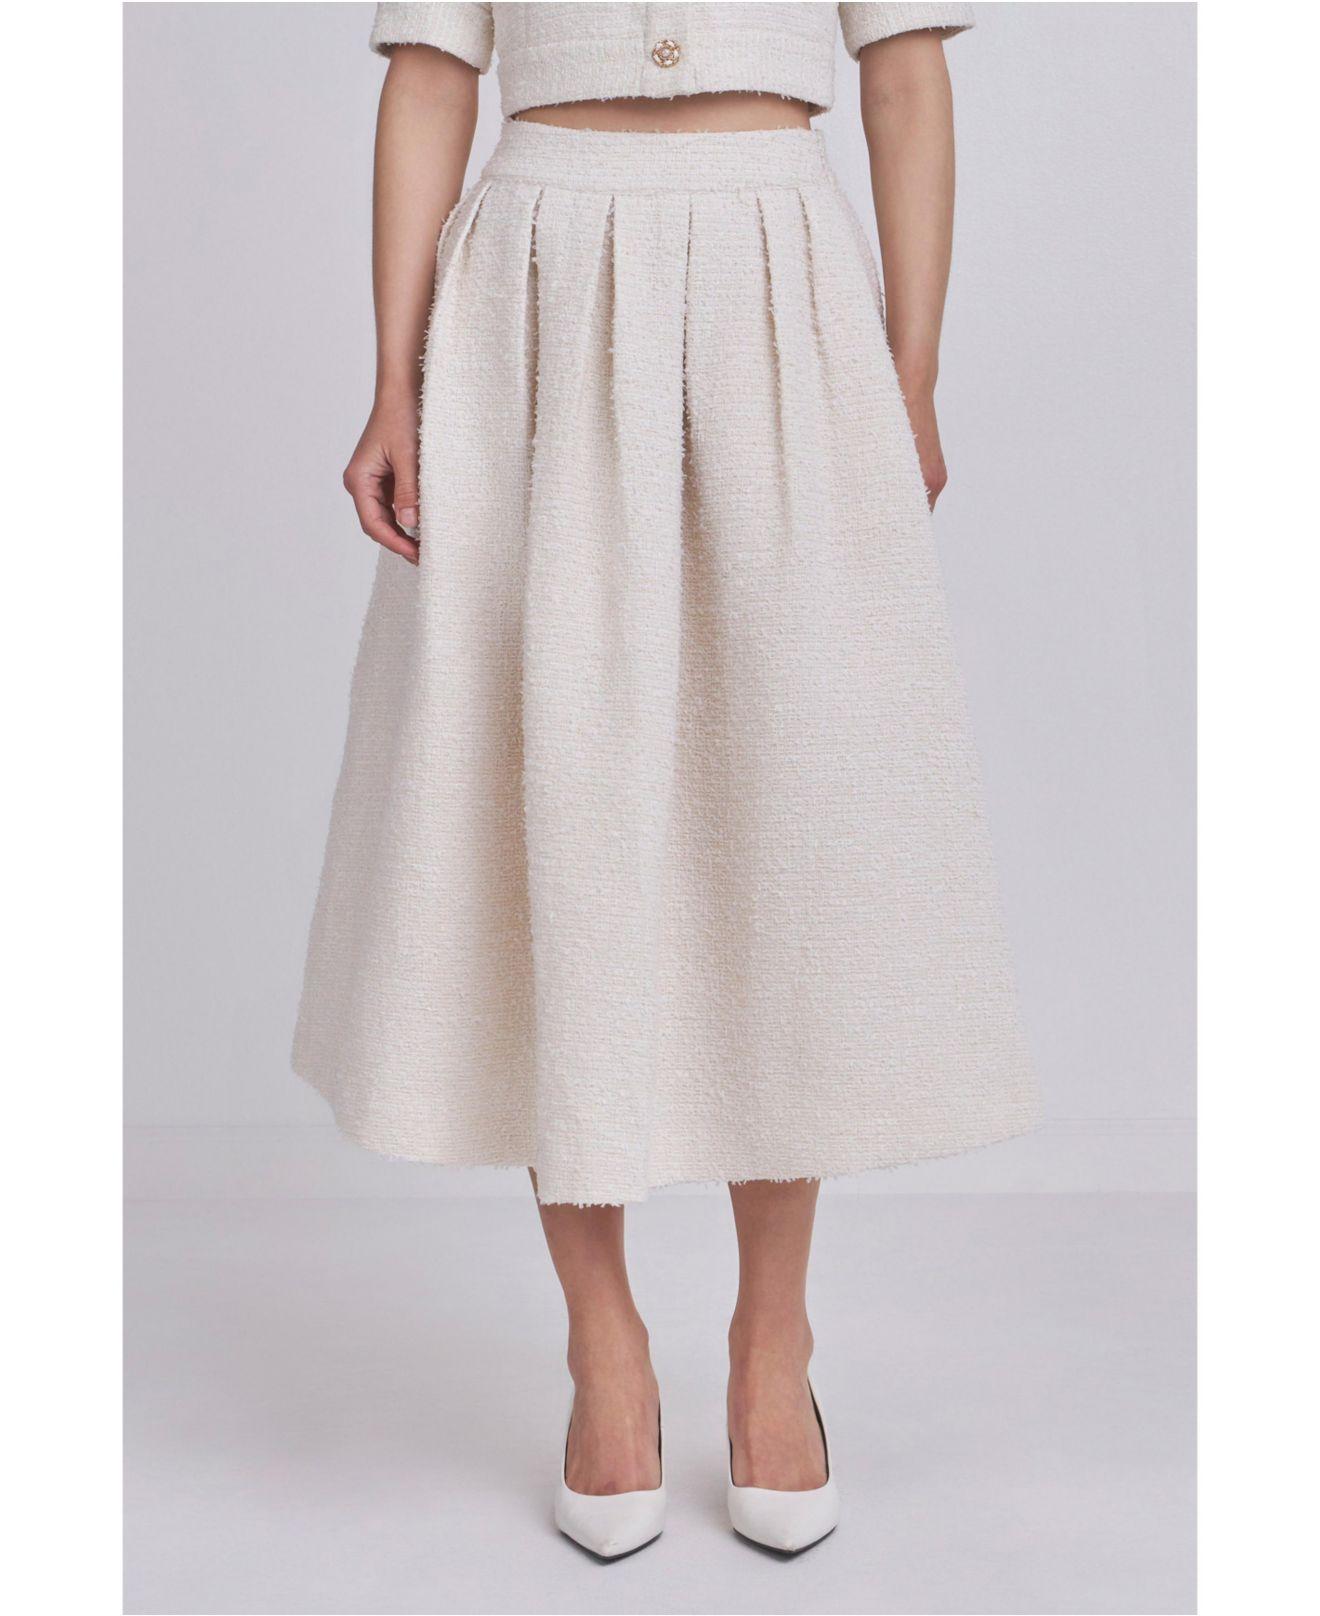 Endless Rose Tweed Maxi Skirt in White | Lyst